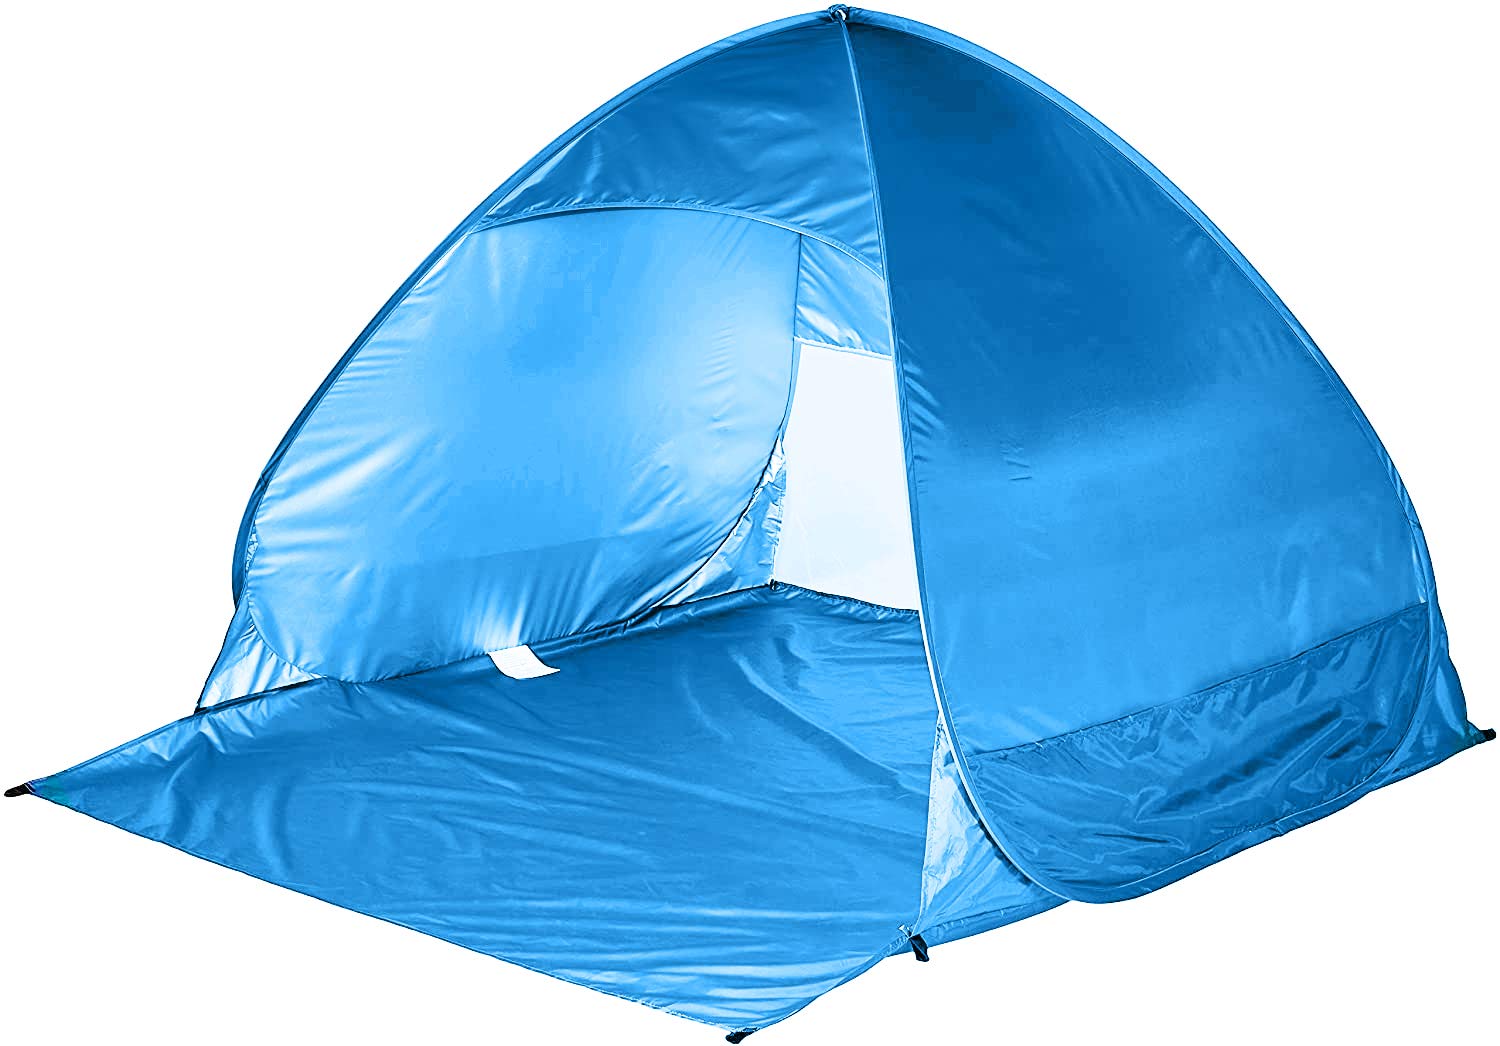 HYGRAD® Pop Up Beach Tent,Rated UPF 50+ for UV Sun Protection,Waterproof Sun Shelters for Family Camping, Fishing, Picnic (Blue)… (Blue)